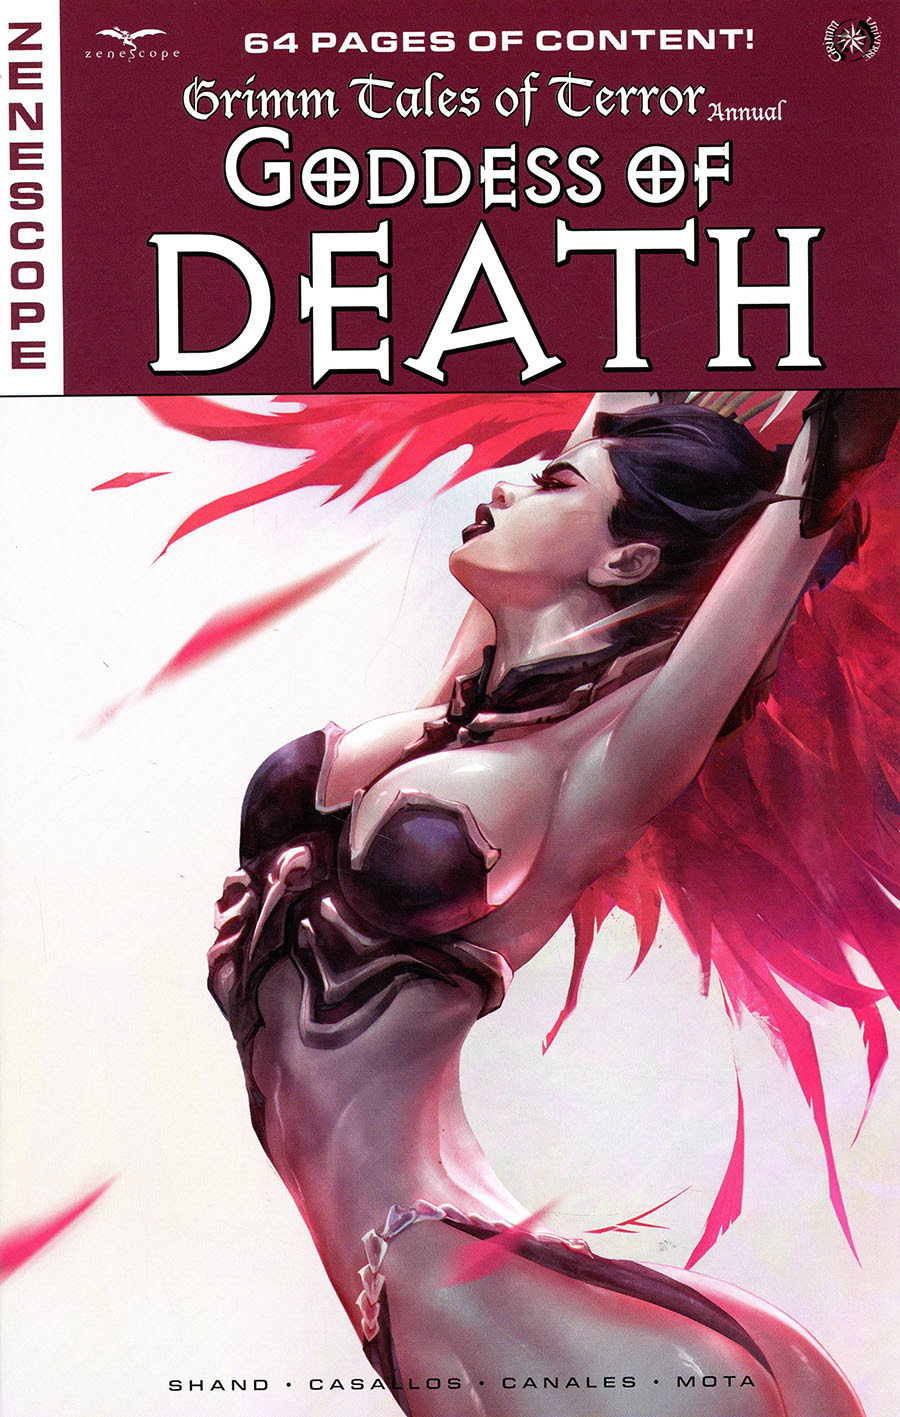 Grimm Fairy Tales Presents Grimm Tales Of Terror Annual #1 Goddess Of Death Cover C Ivan Tao